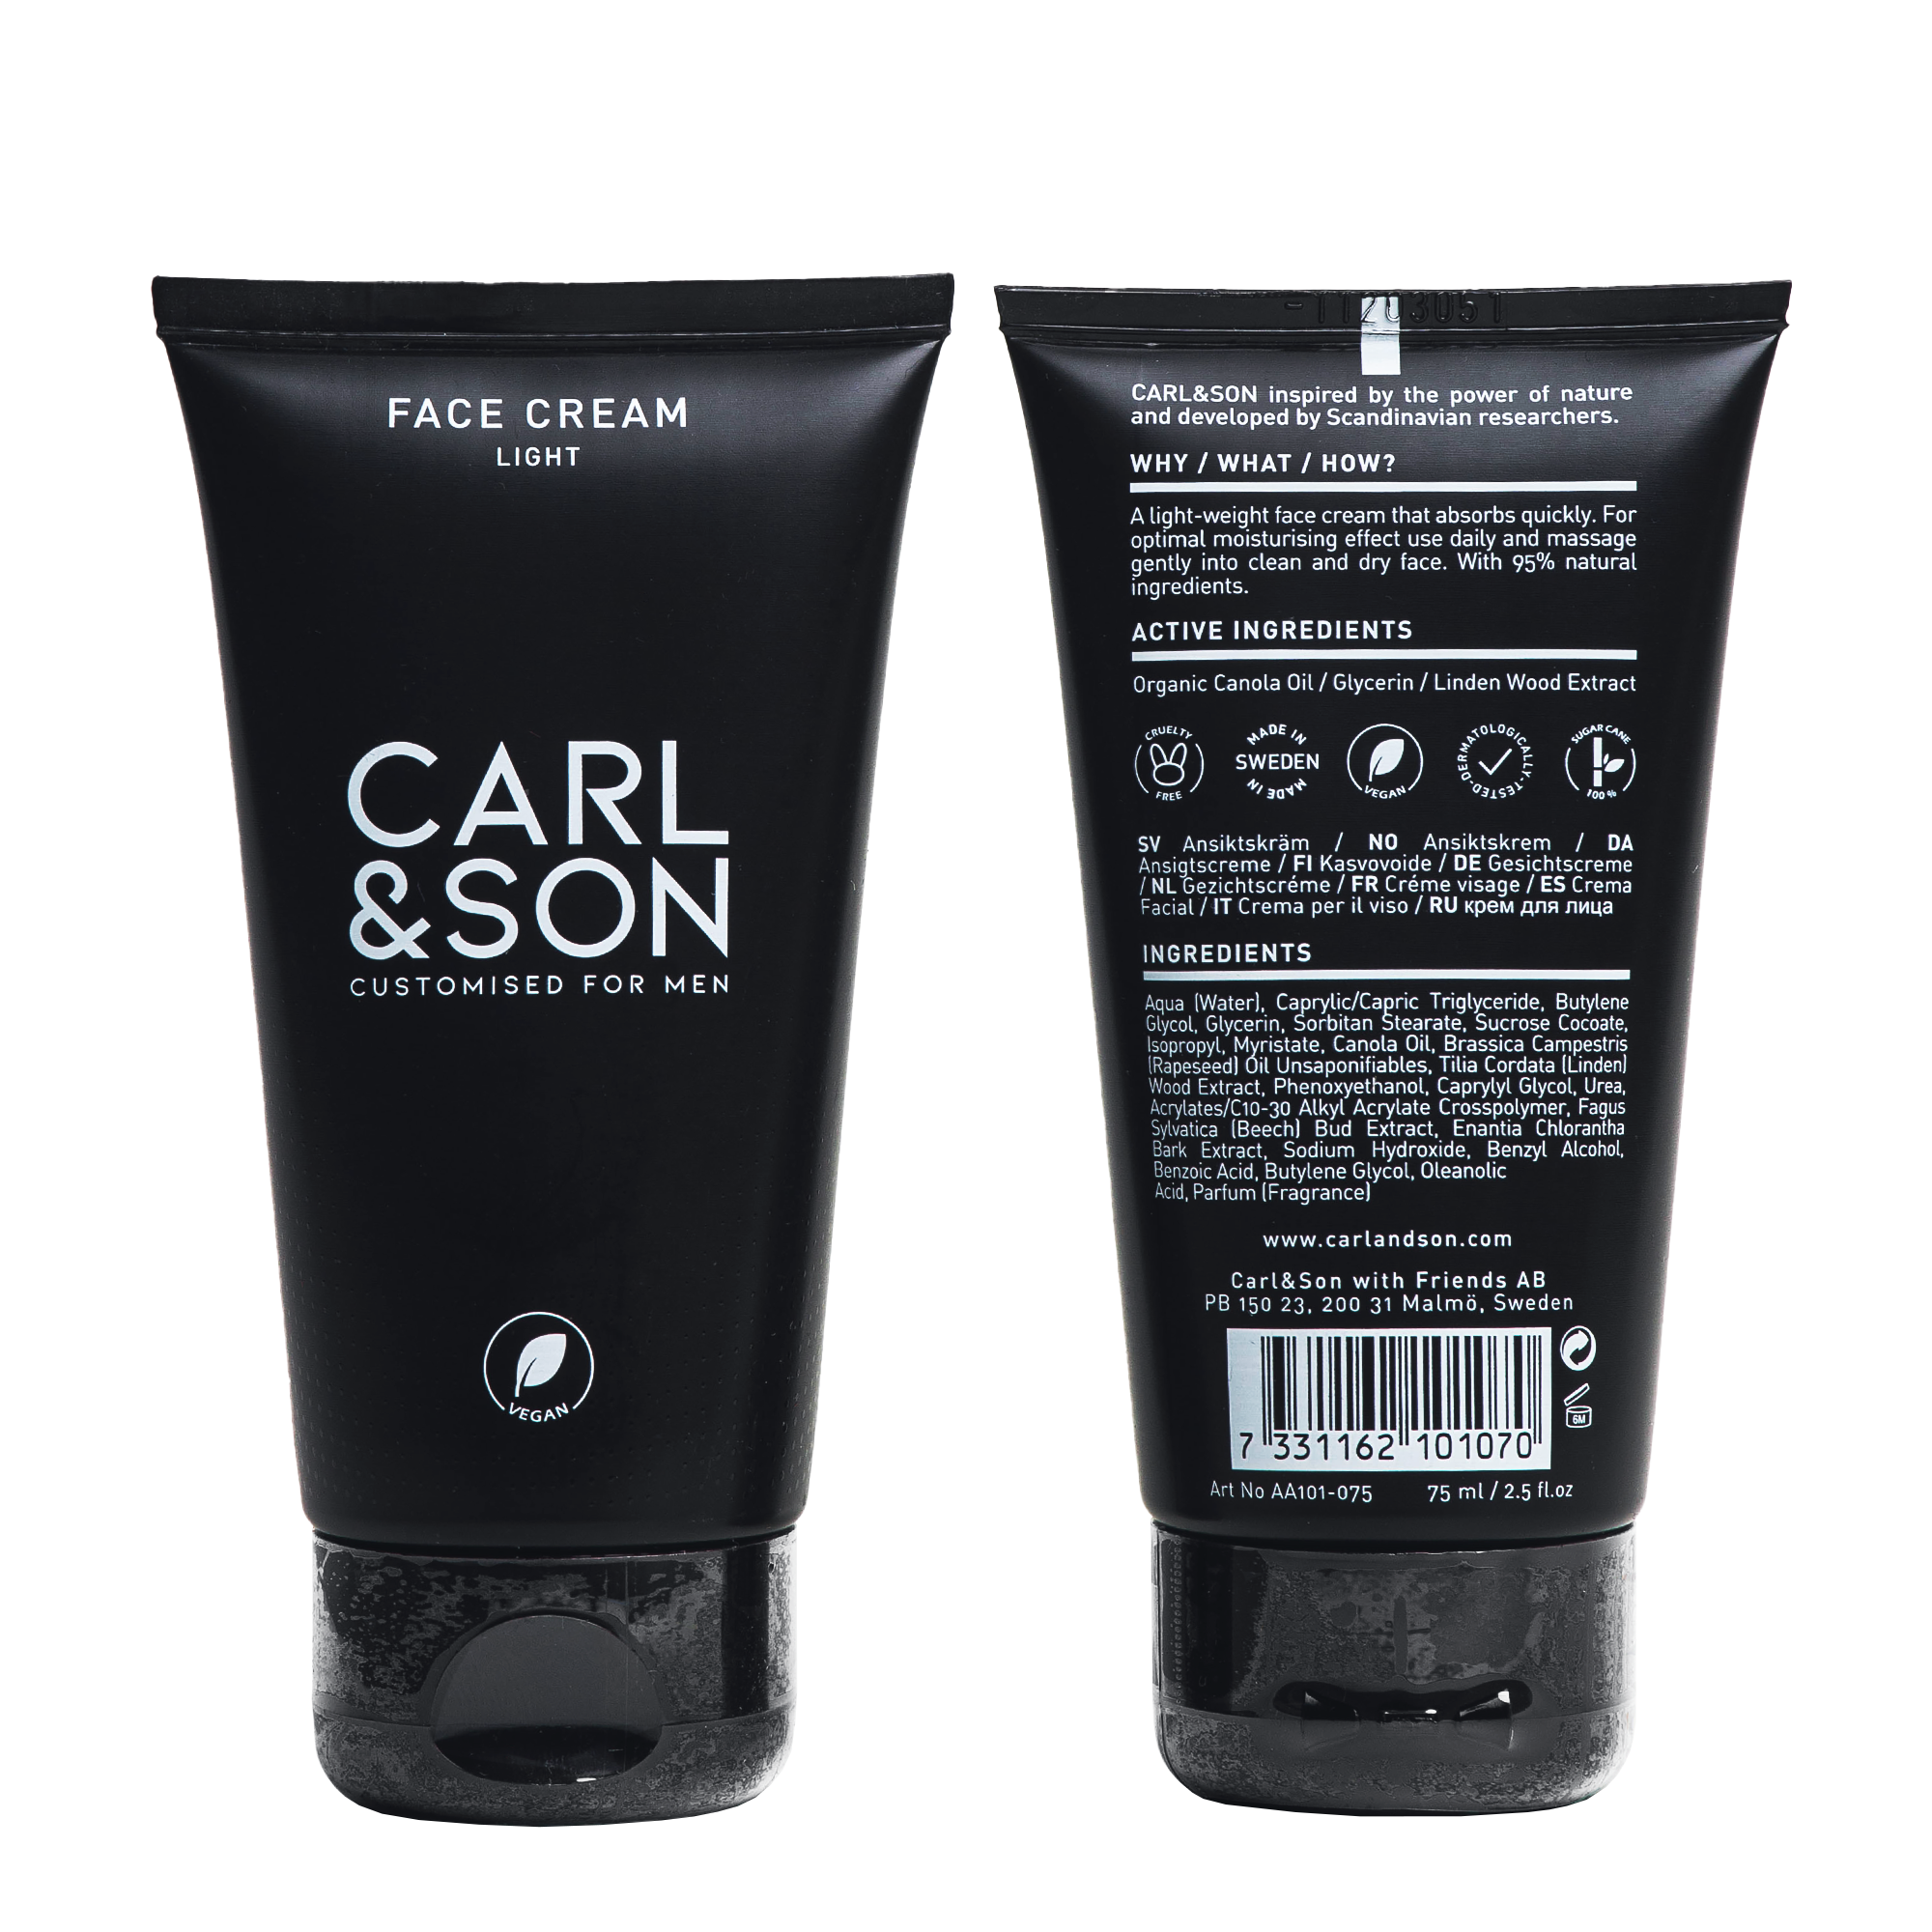 Face Cream Light / After shave lotion